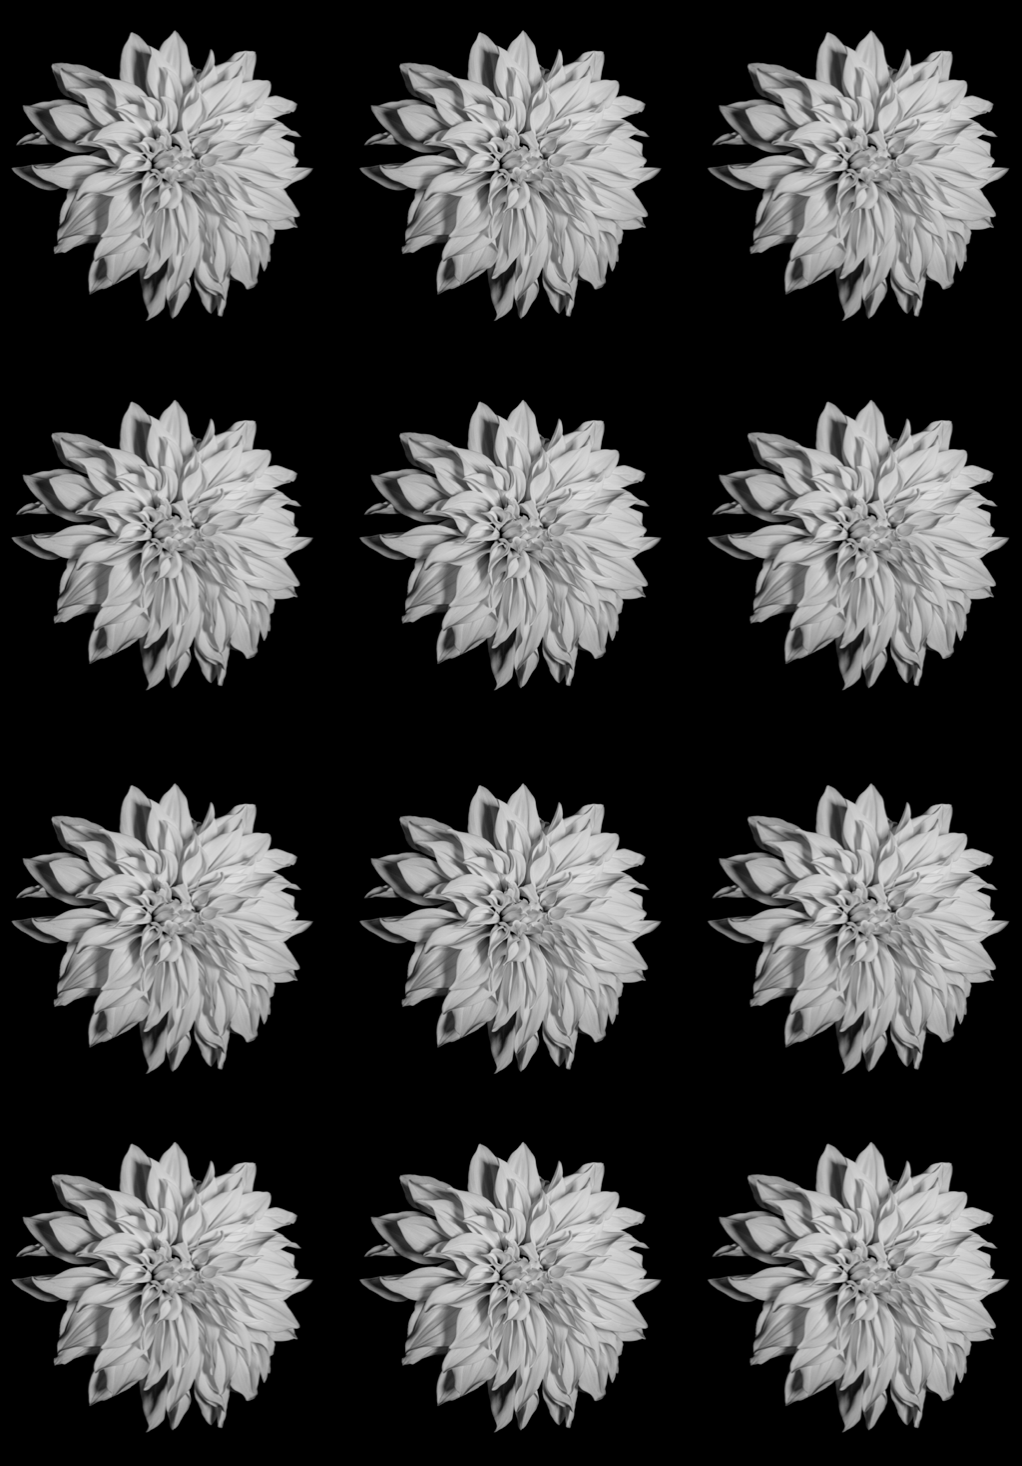 Dahlia Dreams - Wrapping Paper - Set of 3 Sheets